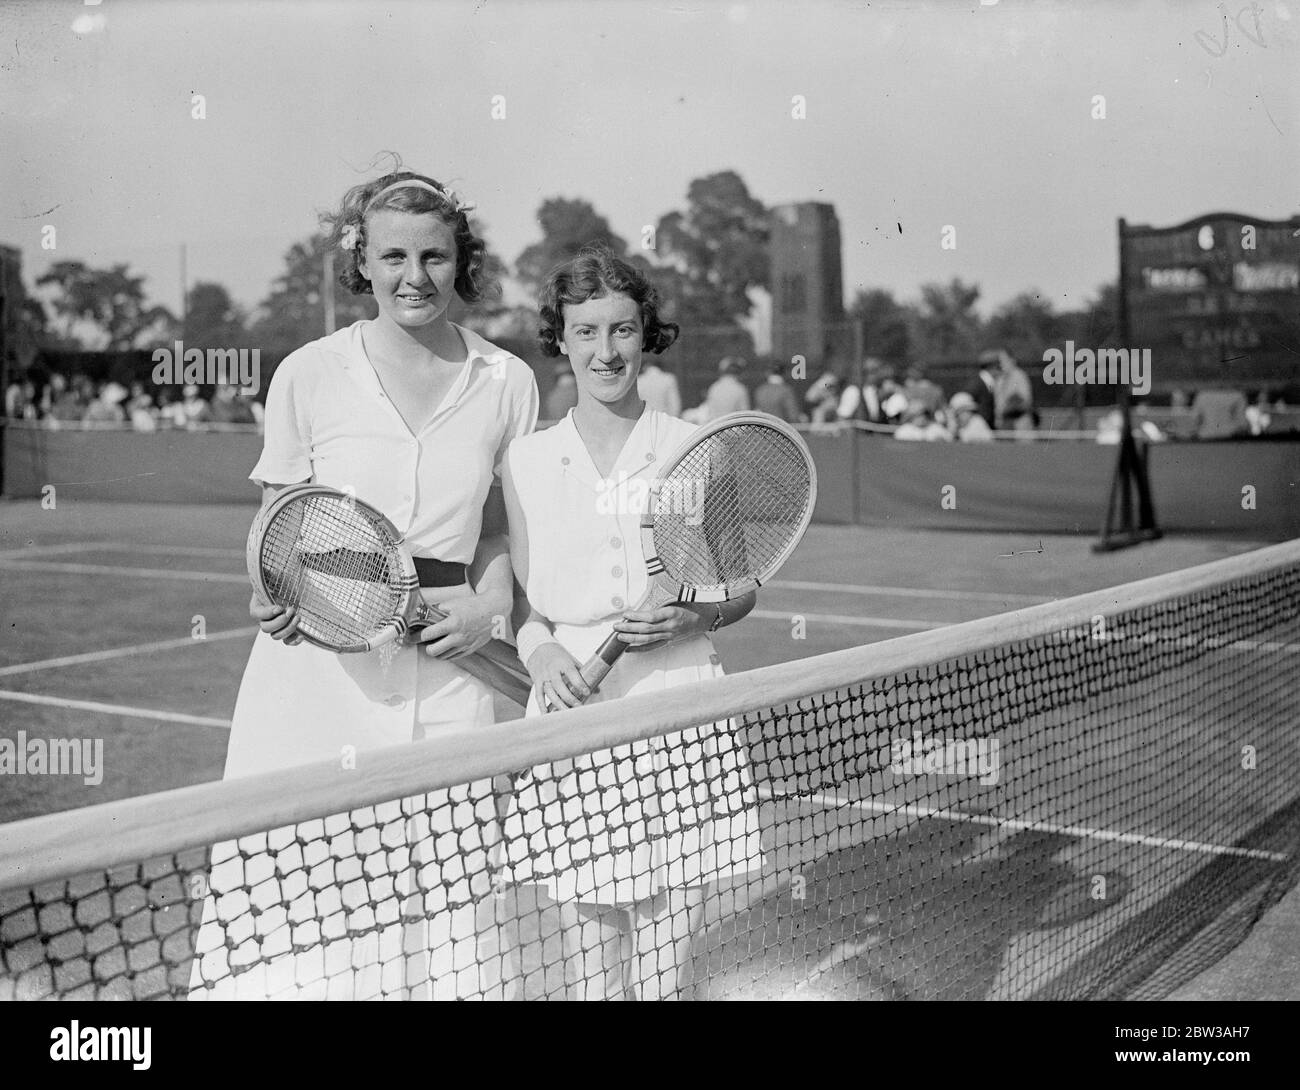 Junior tennis finalists at Wimbledon . The semi finals of the singles of the junior tennis championships were played at Wimbledon . Photo shows the two finalists in the girls ' singles , Miss Rowe ( left ) and Miss Platt . 14 September 1934 Stock Photo